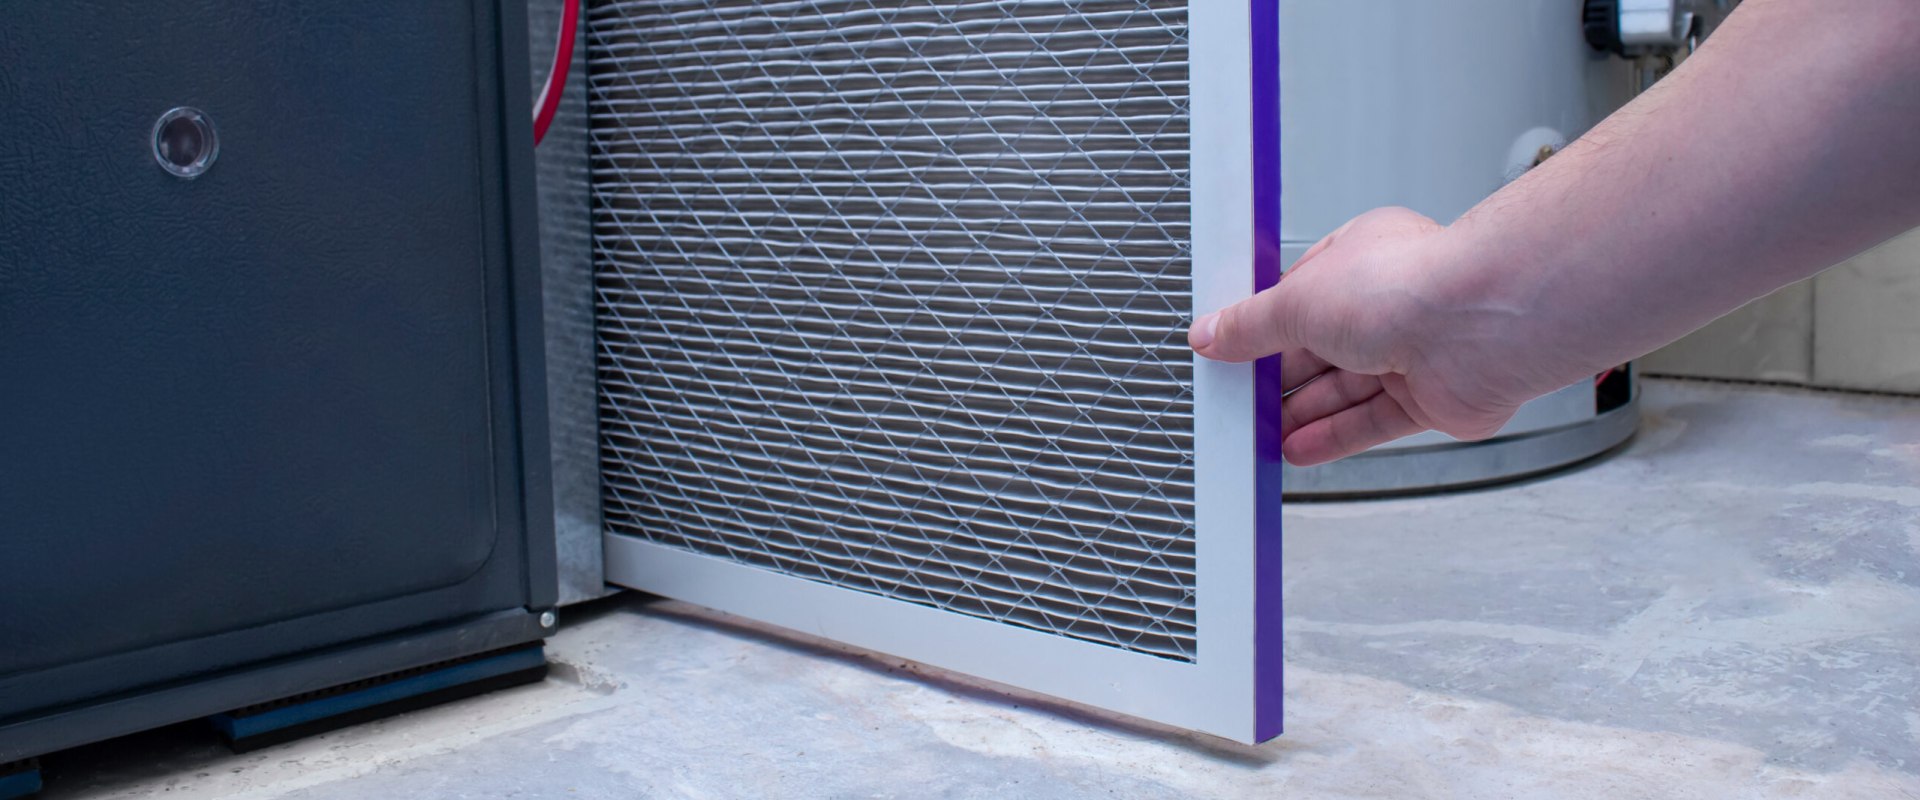 Do Different Air Filters Make a Difference?